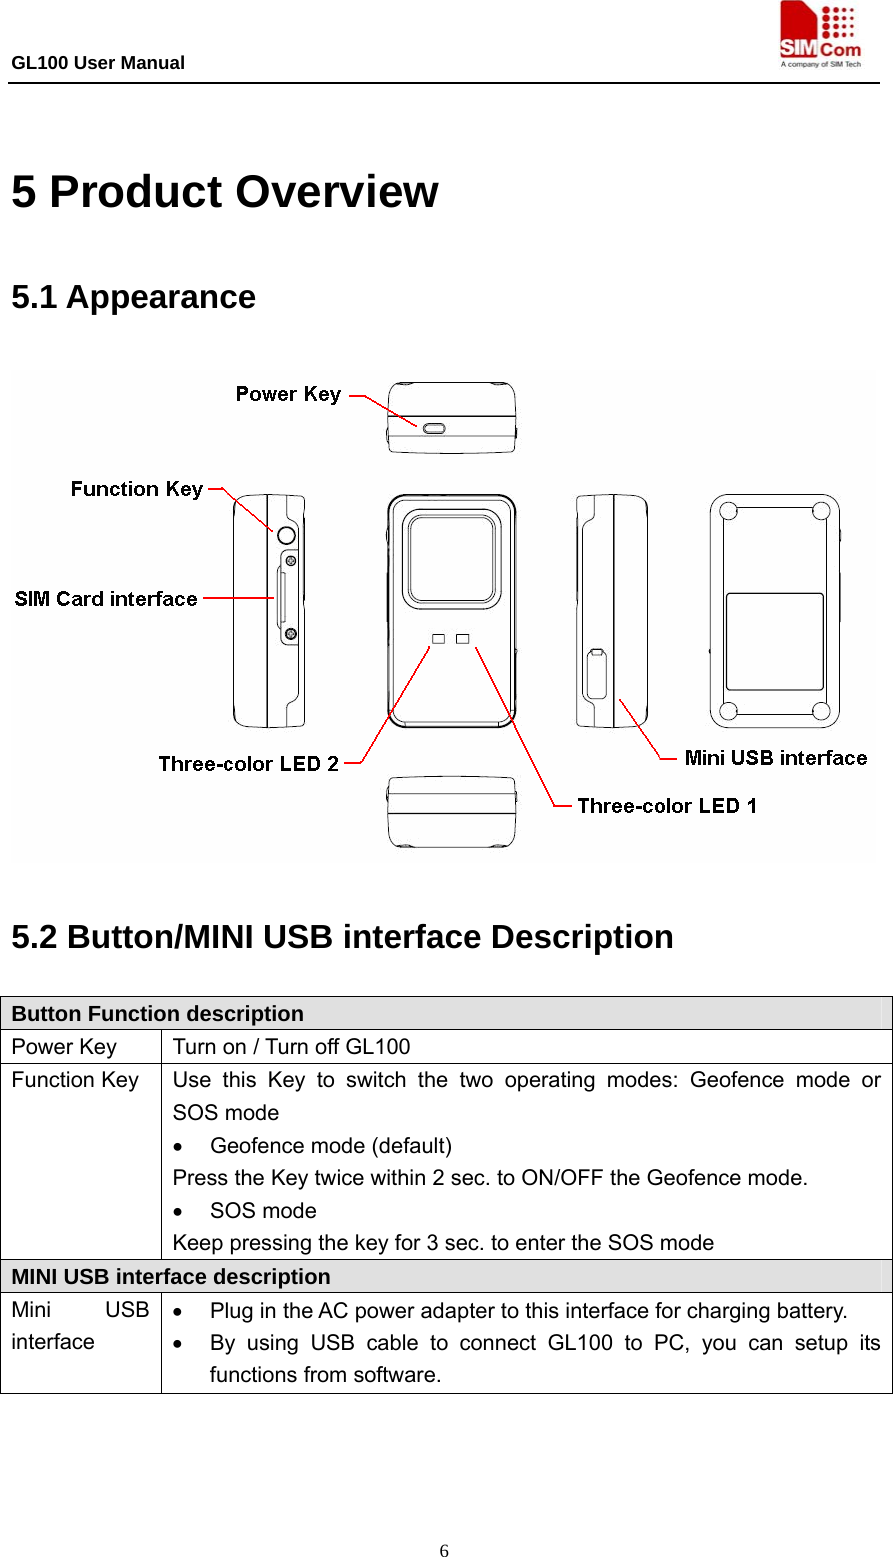 GL100 User Manual                                                                             6  5 Product Overview 5.1 Appearance  5.2 Button/MINI USB interface Description Button Function description Power Key  Turn on / Turn off GL100 Function Key  Use this Key to switch the two operating modes: Geofence mode or SOS mode •  Geofence mode (default) Press the Key twice within 2 sec. to ON/OFF the Geofence mode. • SOS mode Keep pressing the key for 3 sec. to enter the SOS mode MINI USB interface description Mini USB interface •  Plug in the AC power adapter to this interface for charging battery. •  By using USB cable to connect GL100 to PC, you can setup its functions from software.   